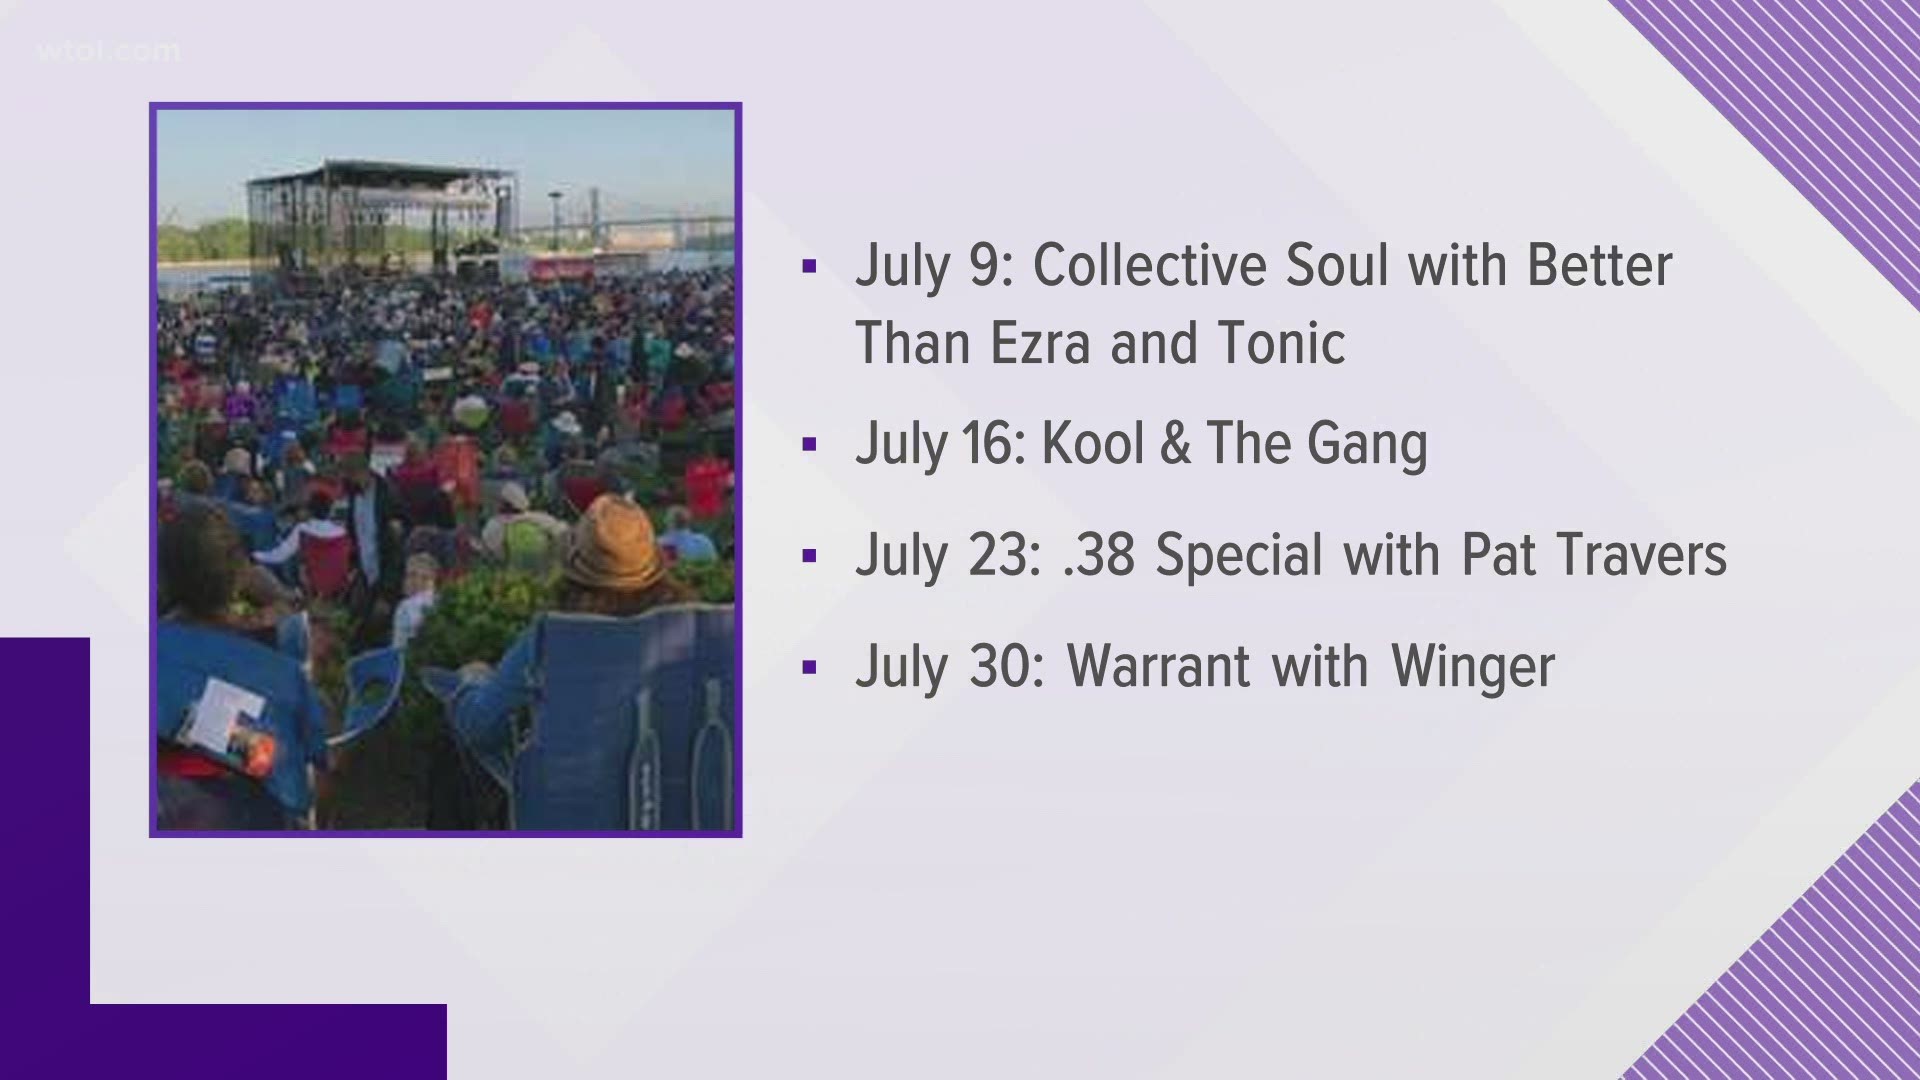 The concerts are back in Promenade Park after being canceled last year due to the pandemic.